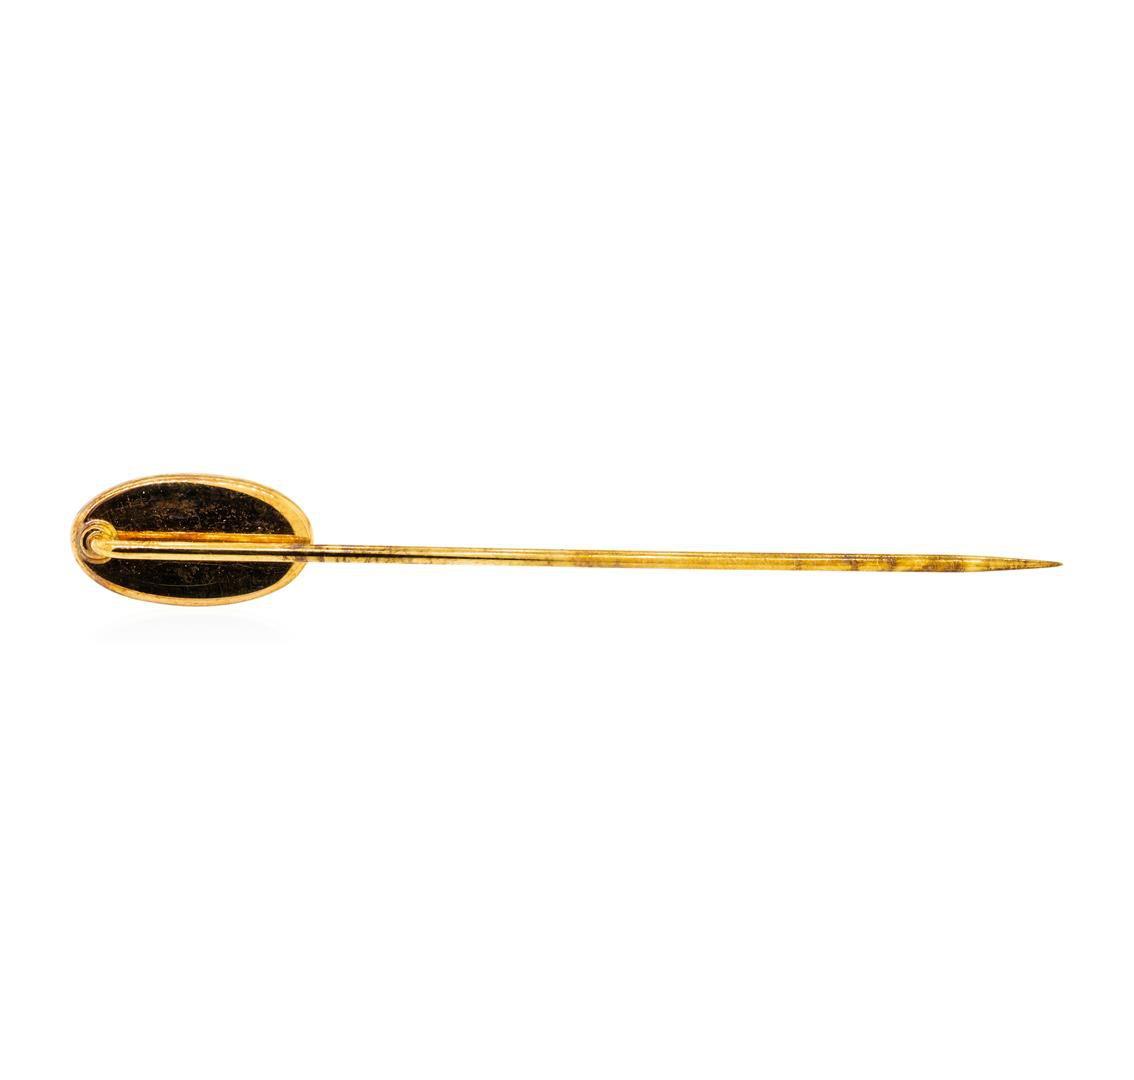 Turquoise Stick Pin - 14KT Rose Gold